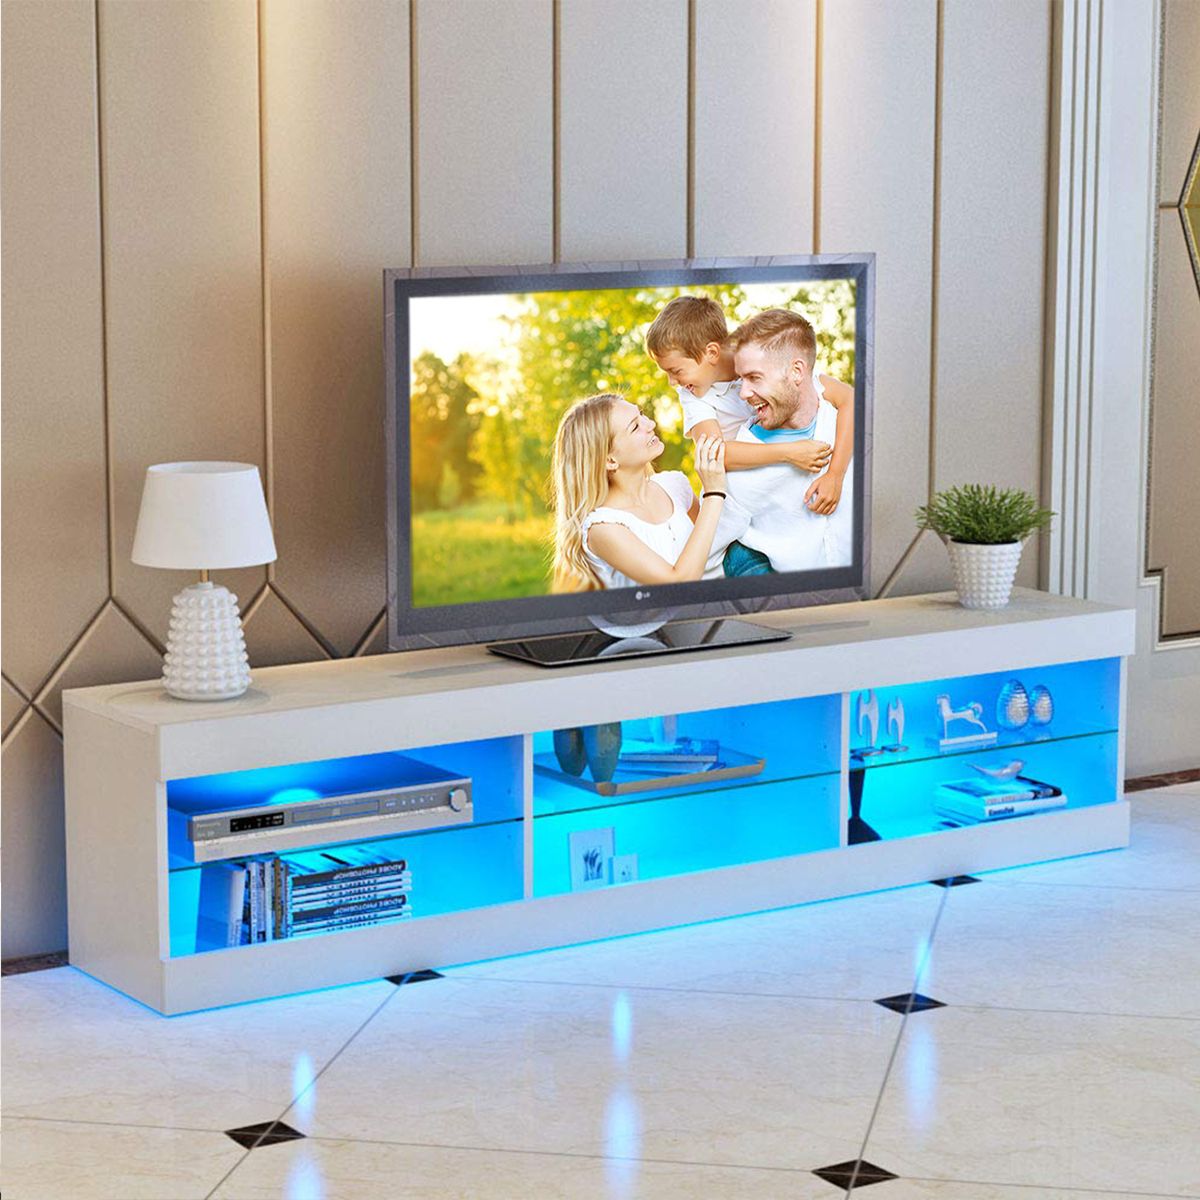 Rgb Led Tv Stand Entertainment Center For 65 70 Inch Tv High Gloss Glass  Shelves | Ebay With Rgb Tv Entertainment Centers (View 11 of 15)